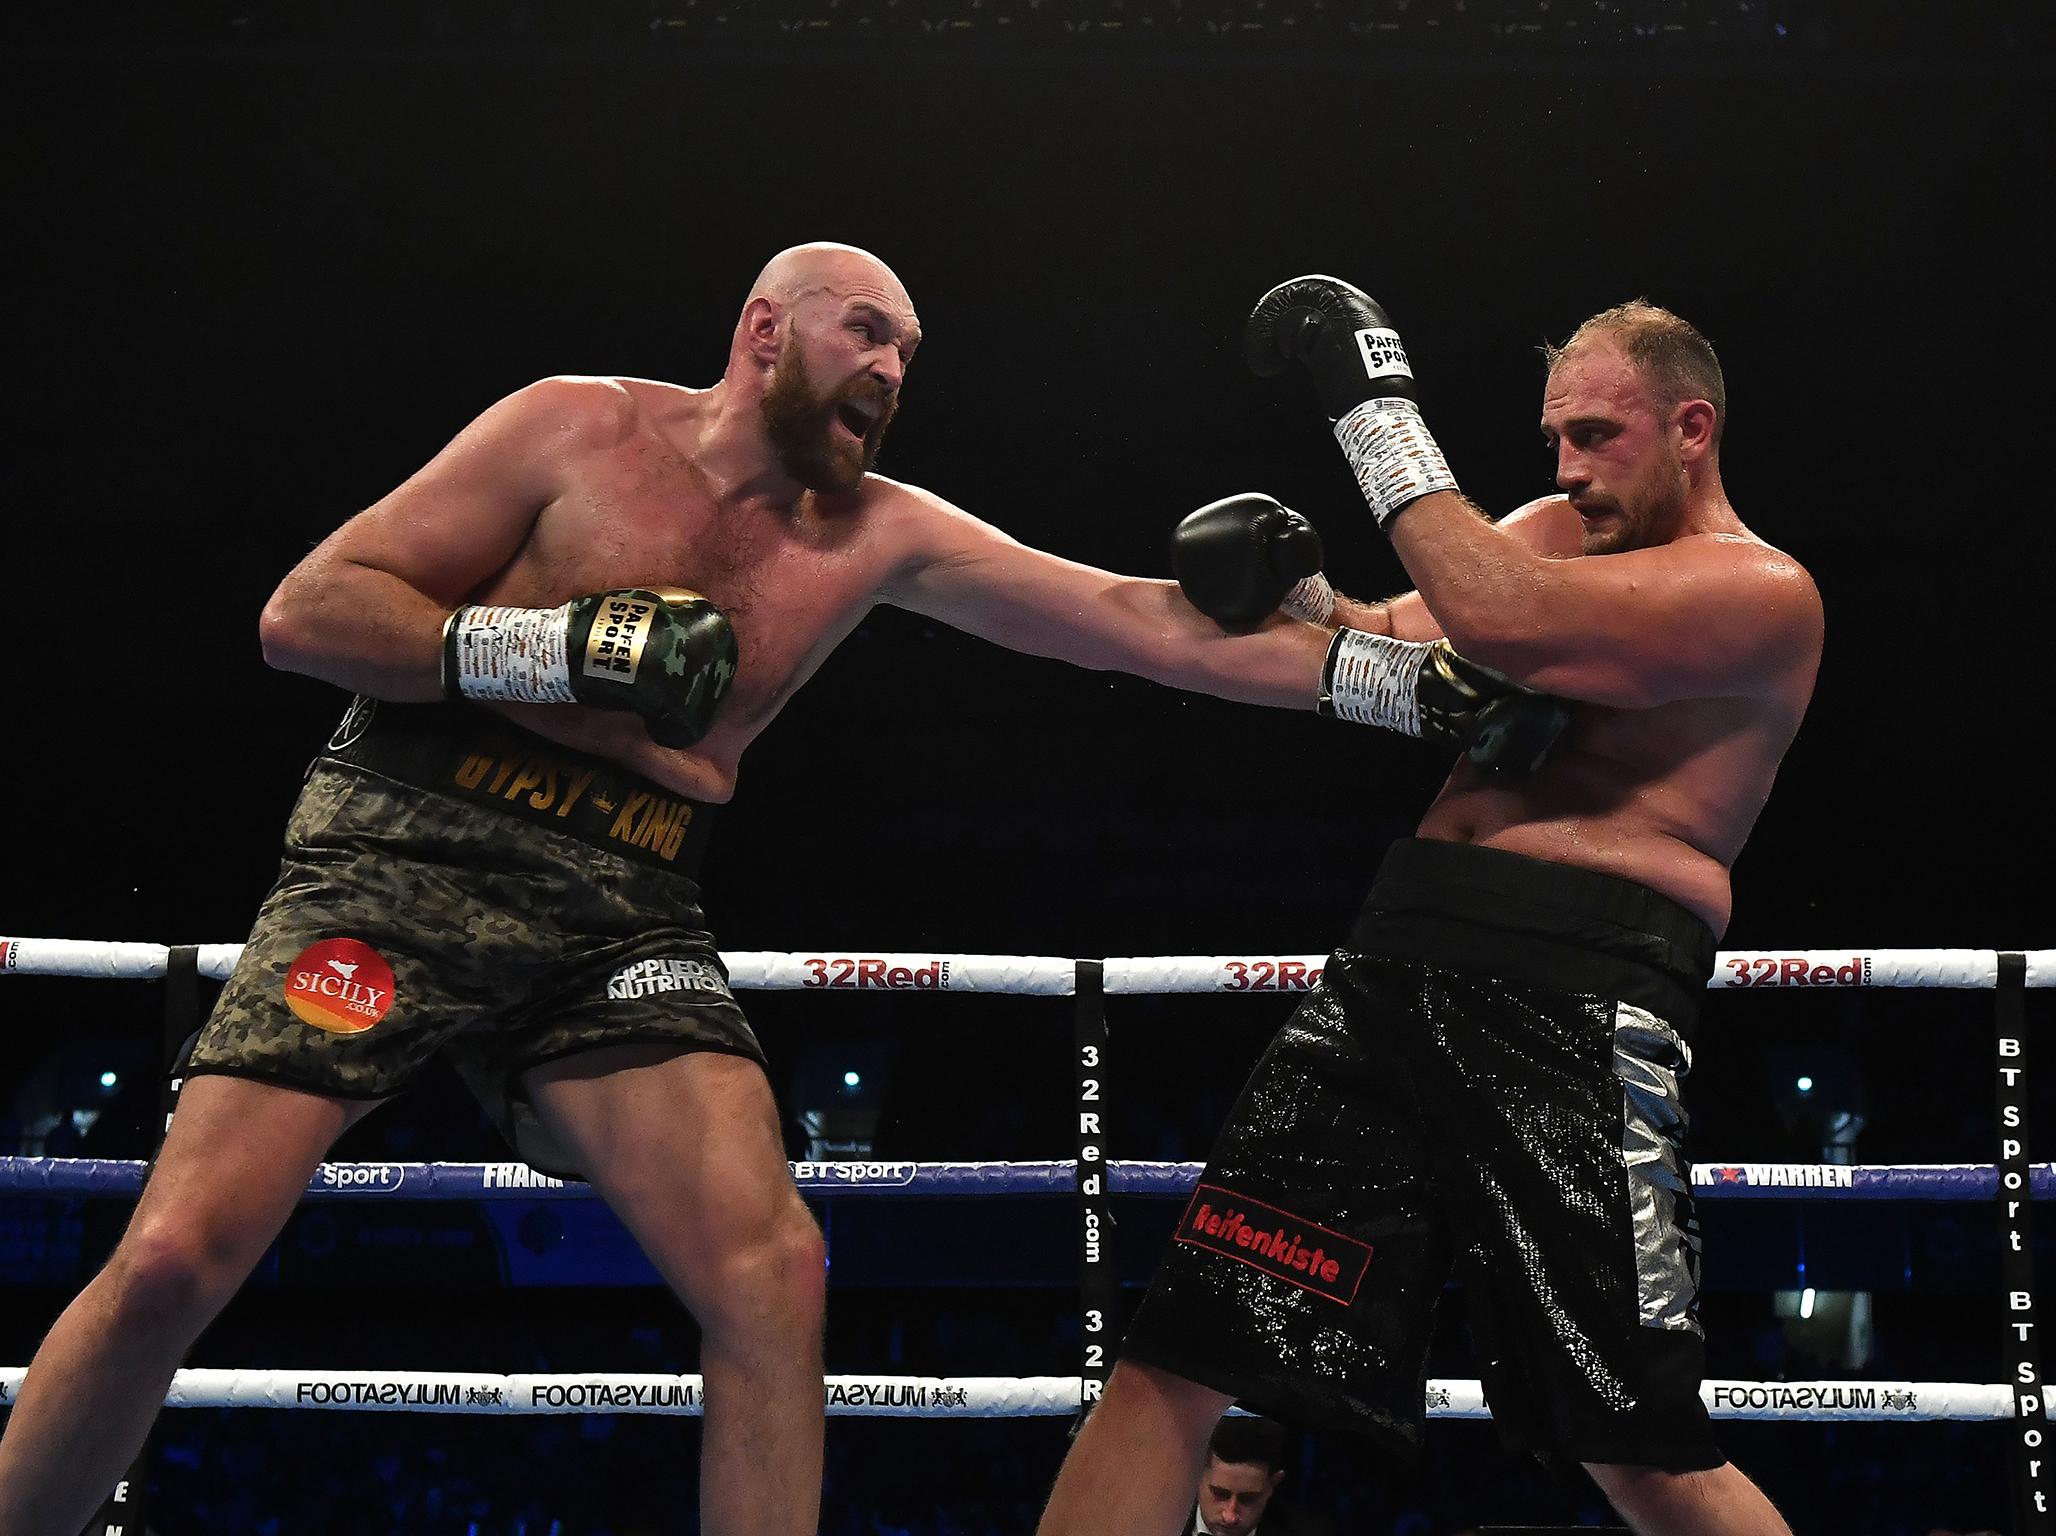 Fury has turned his life around to make a remarkable return to the ring